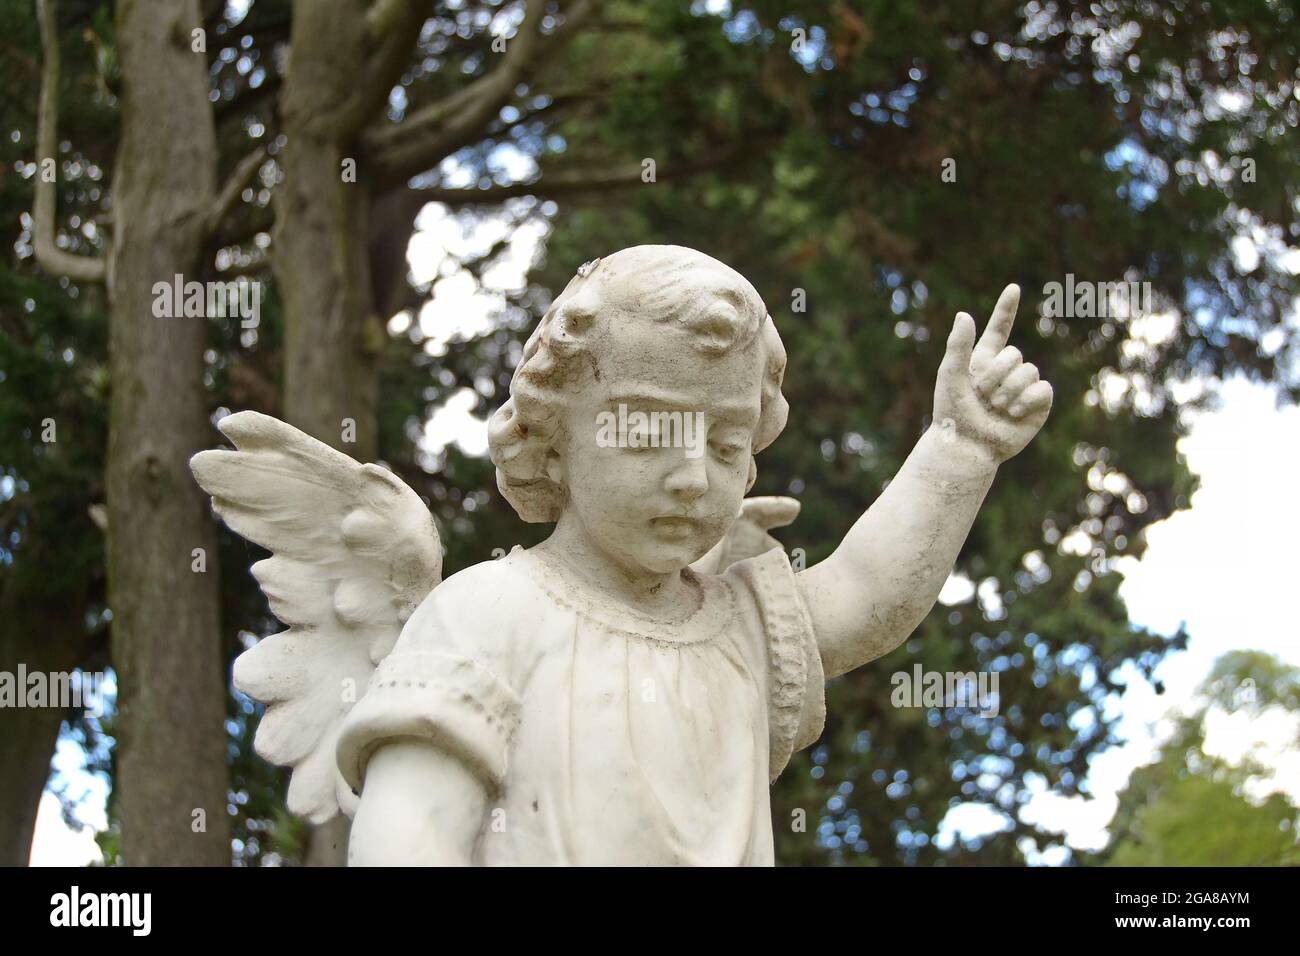 An angel boy of white stone, pointing sky with trees vegetal background. Looking down to the floor. Stock Photo